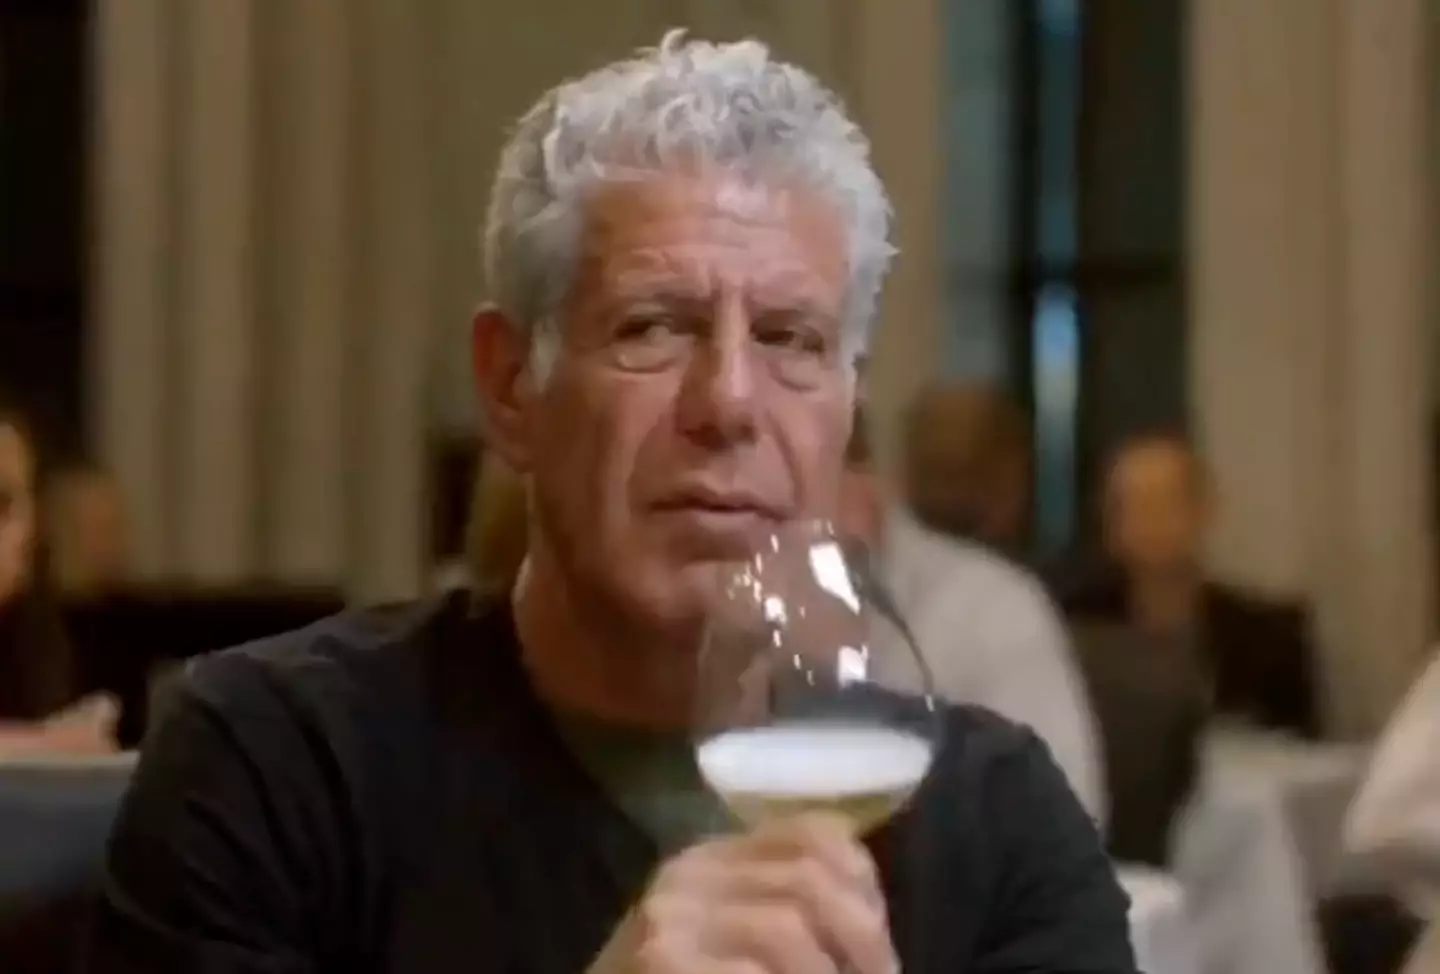 Anthony Bourdain's reaction to the toasting of the Queen has gone viral online.